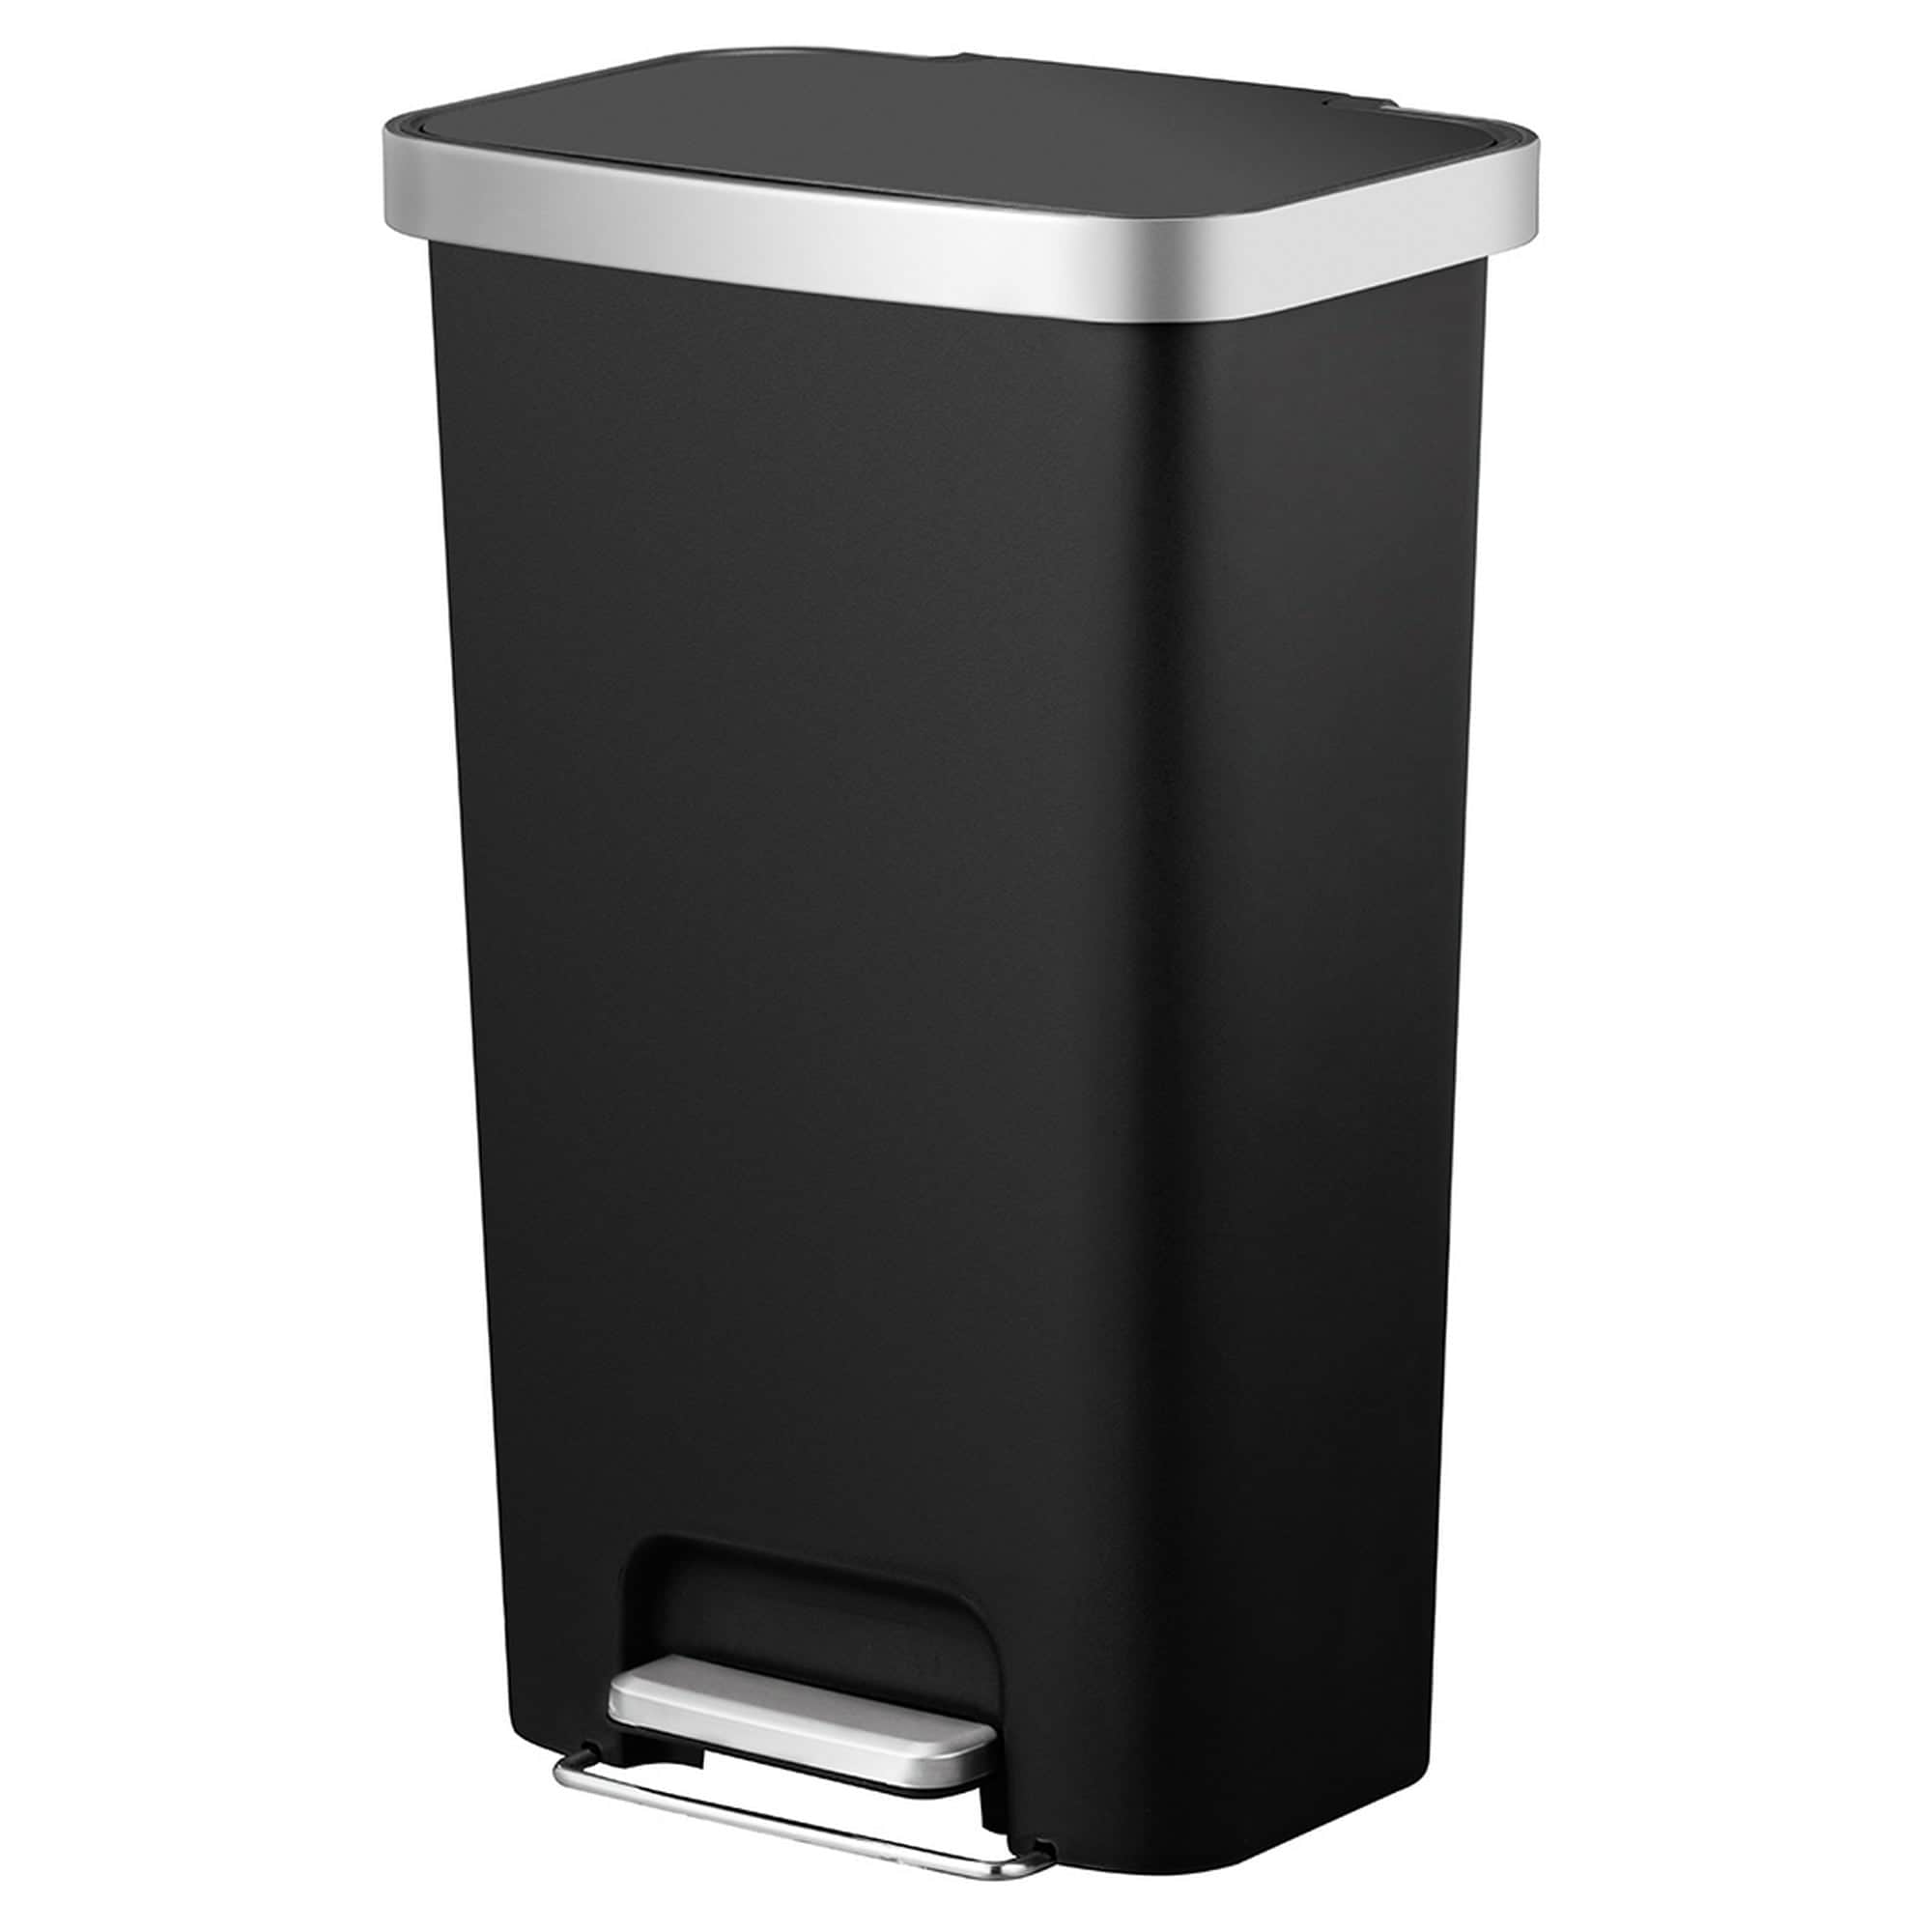 13.2 Gallon Kitchen Step Trash Can with Odor Filter, 50 Liter Rose